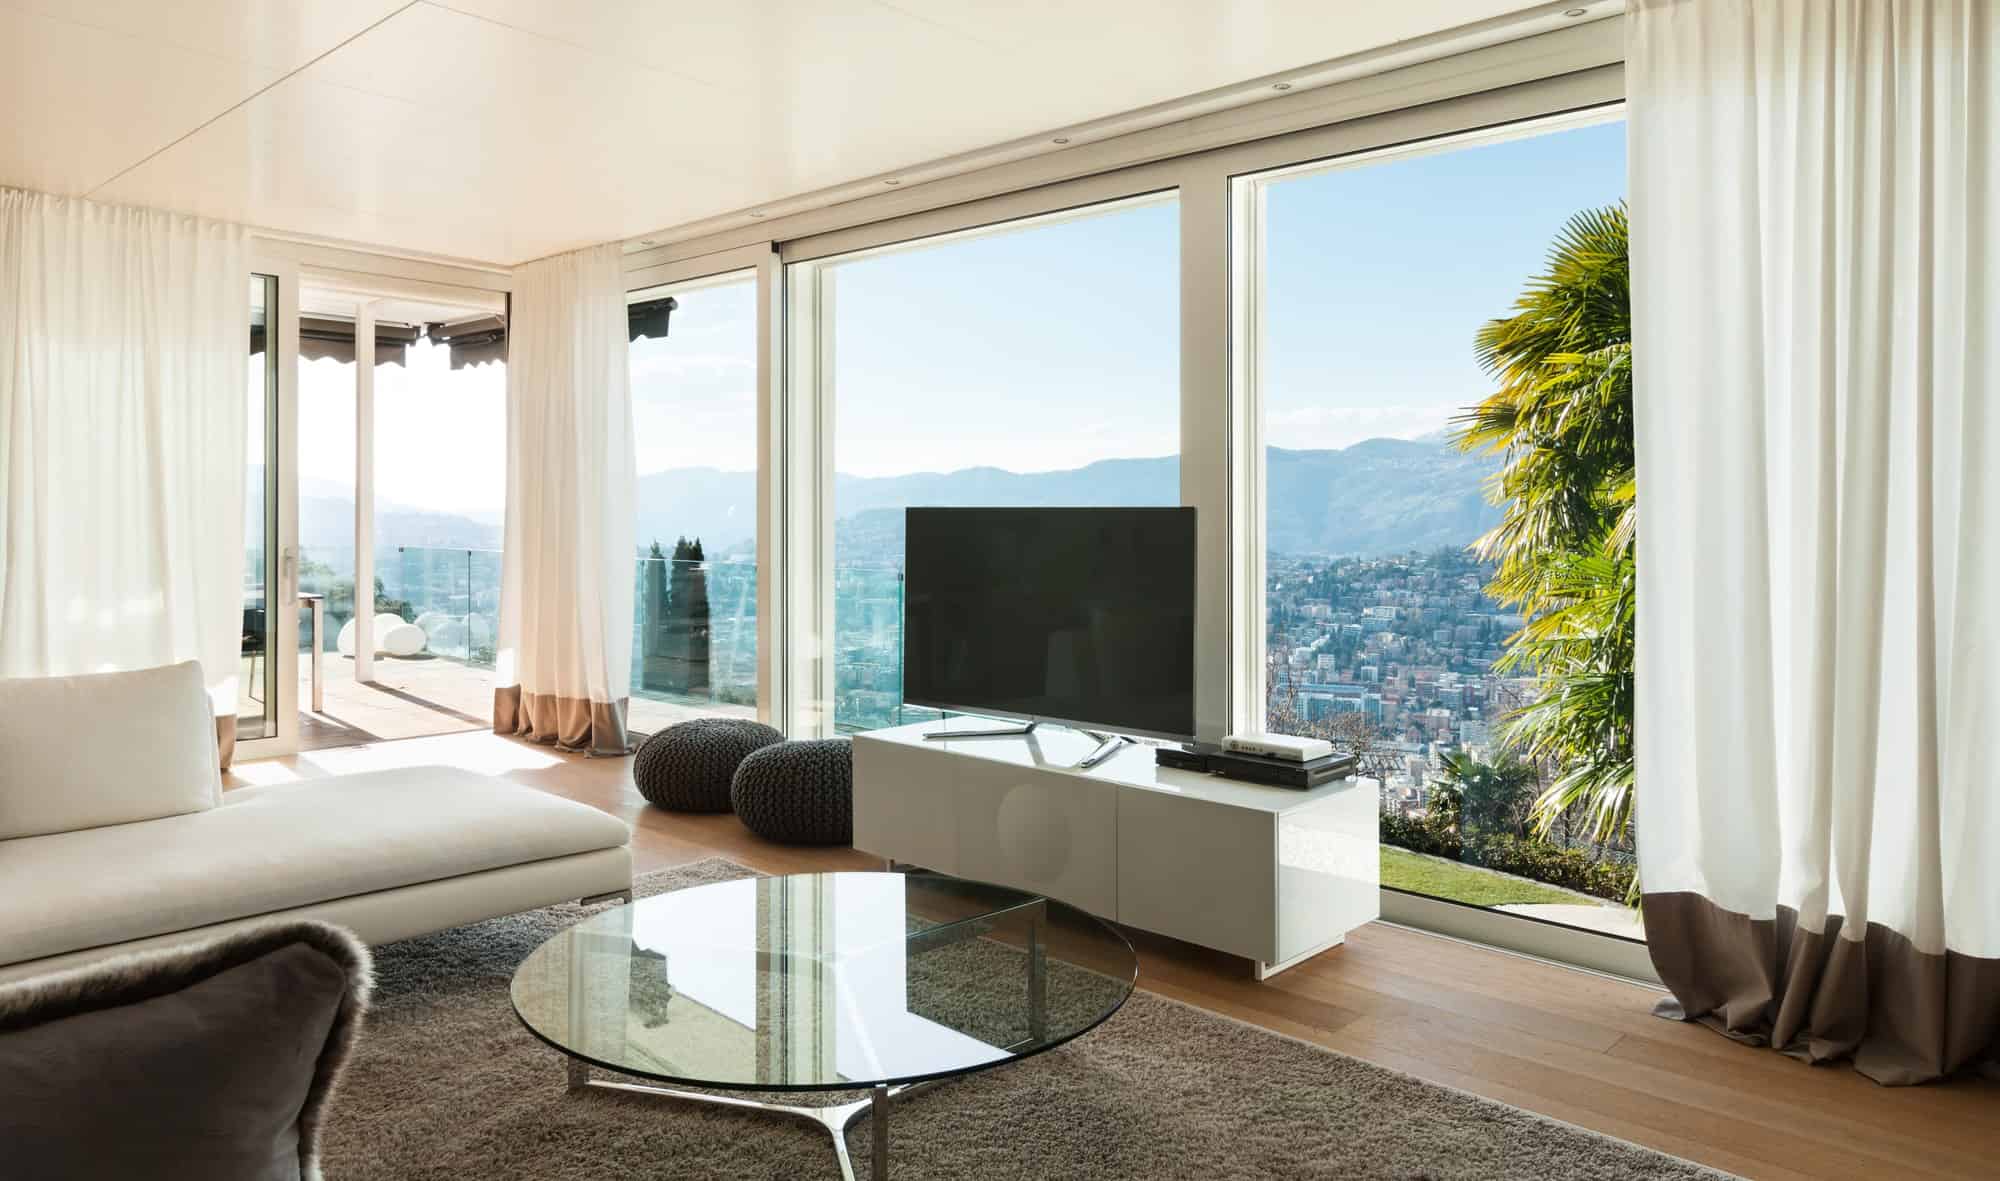 Should you put your tv in front of a window - HomeDIYHQ.com